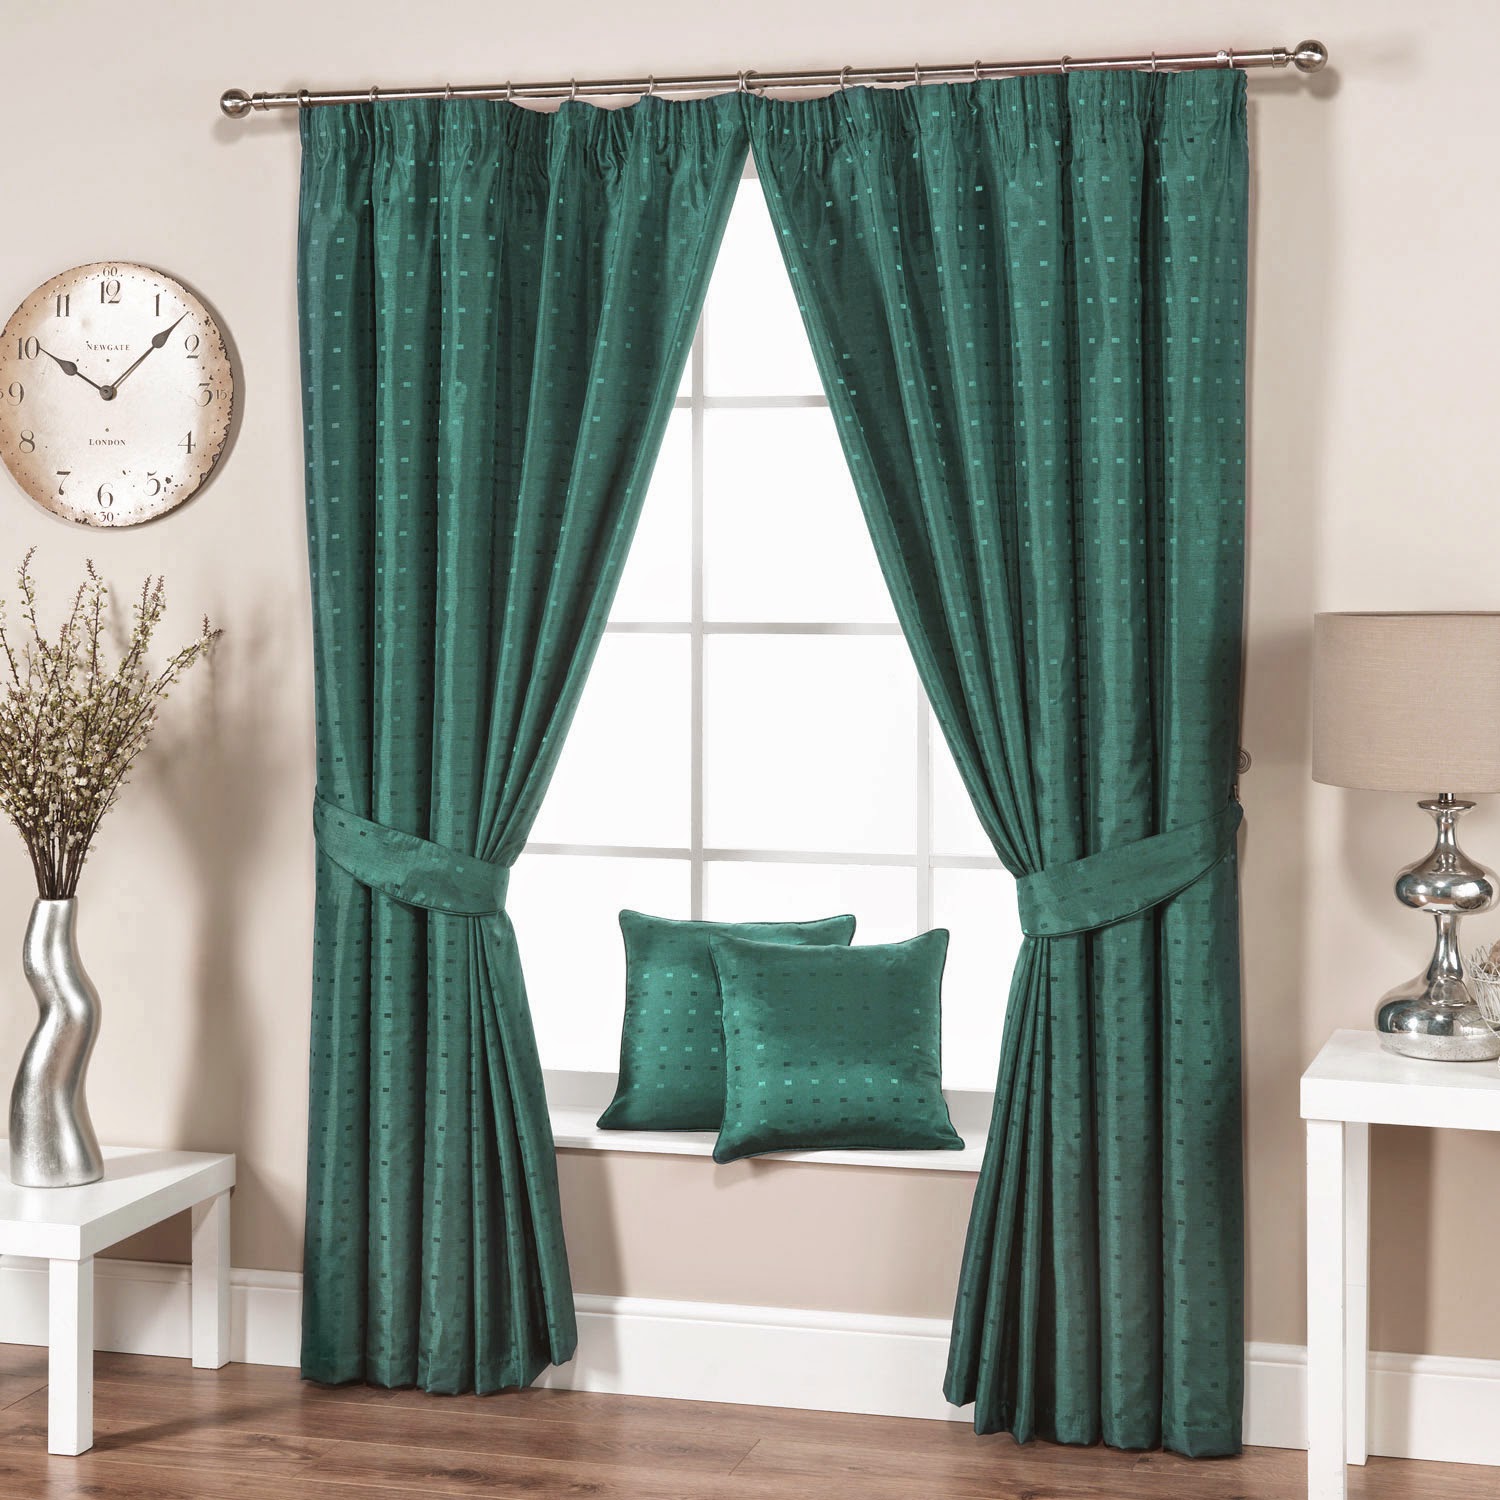 Green living room curtains for modern interior